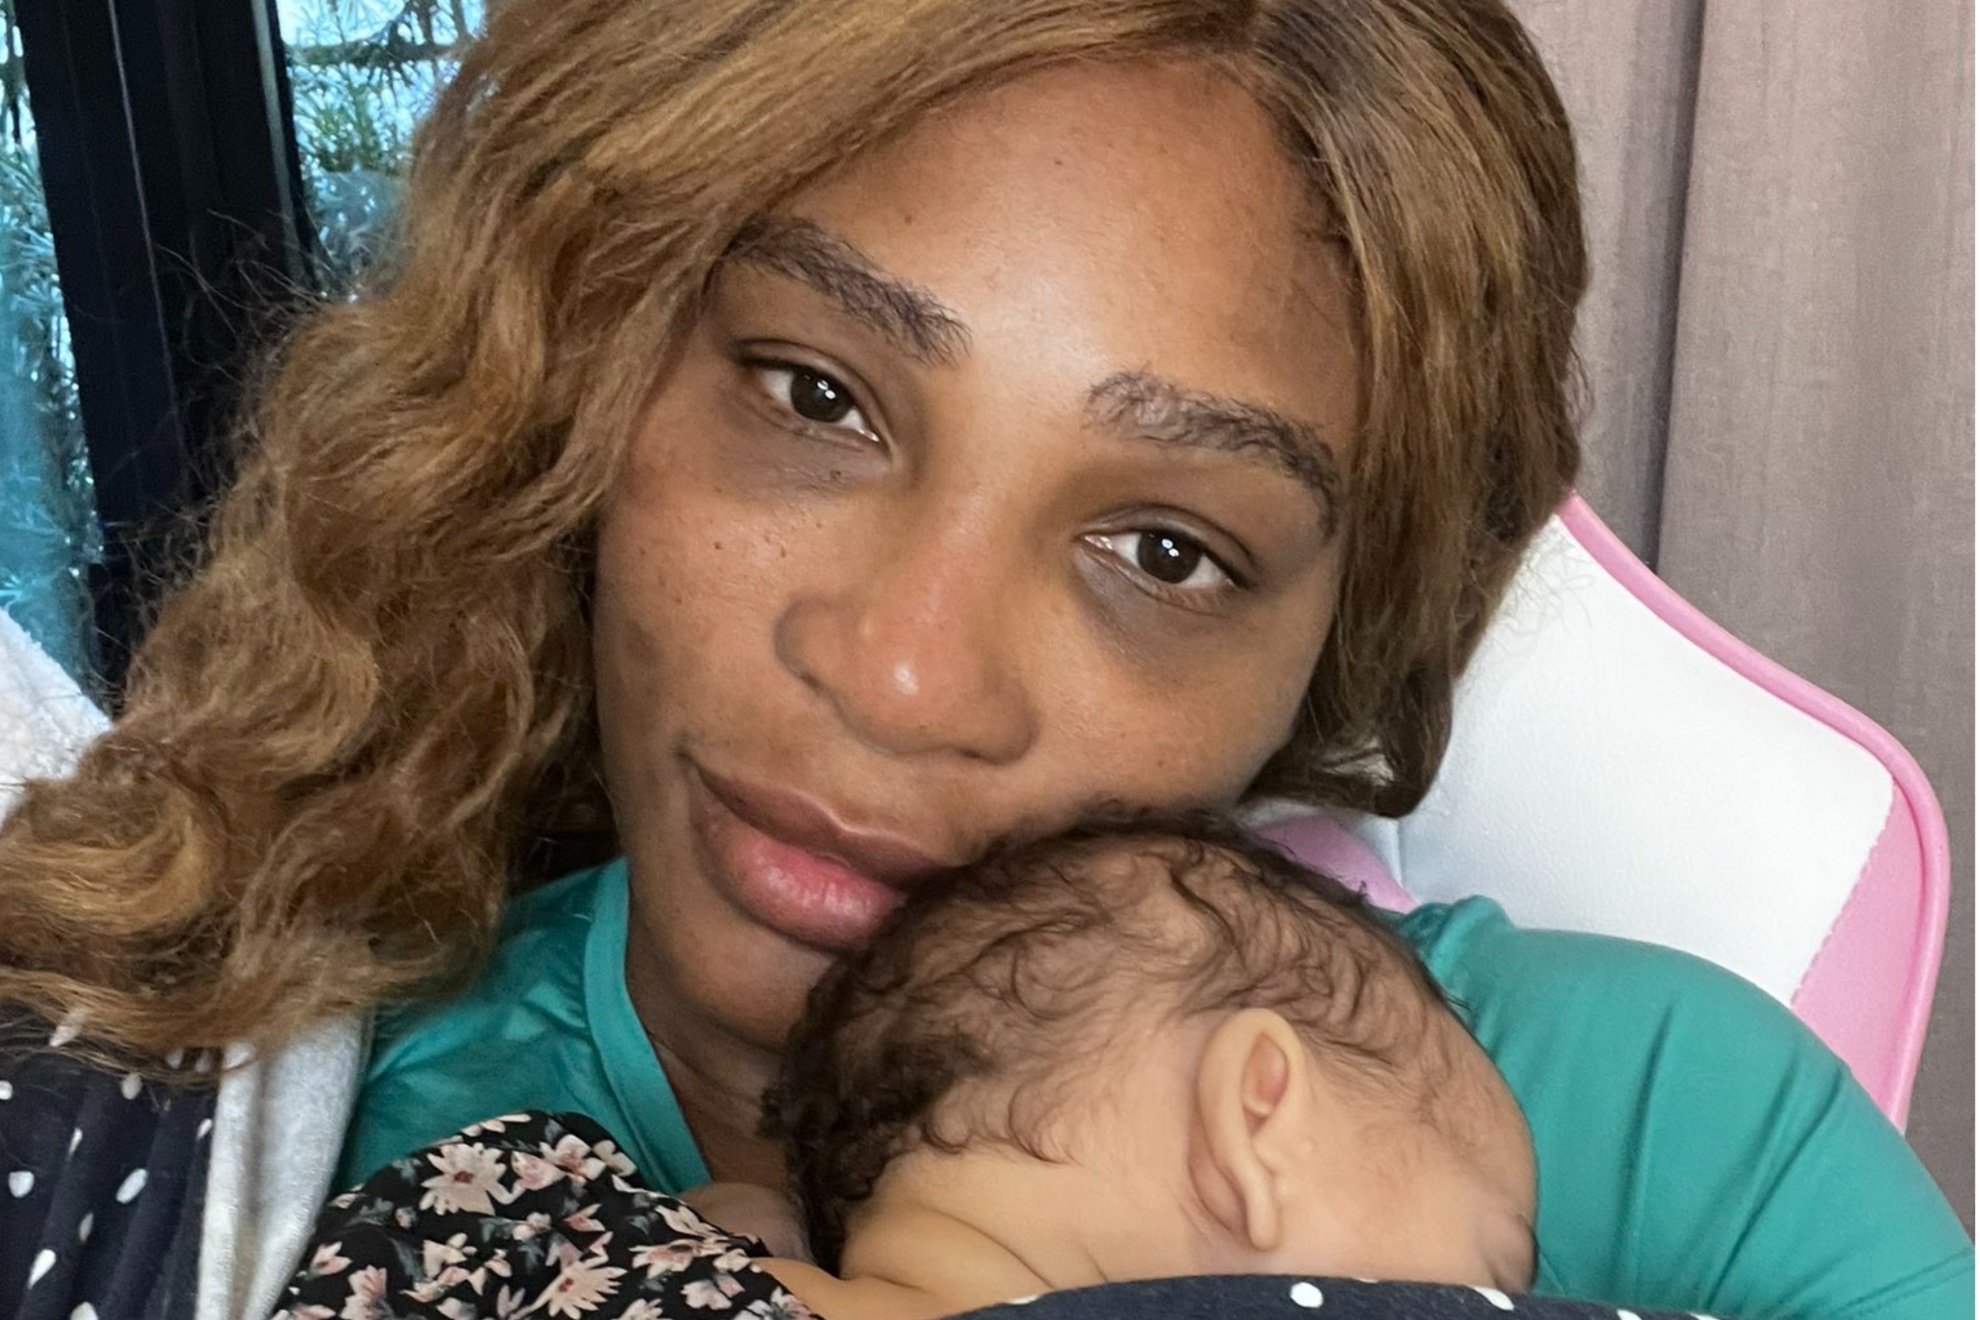 Serena Williams shared on social media that she was having a hard mental health day